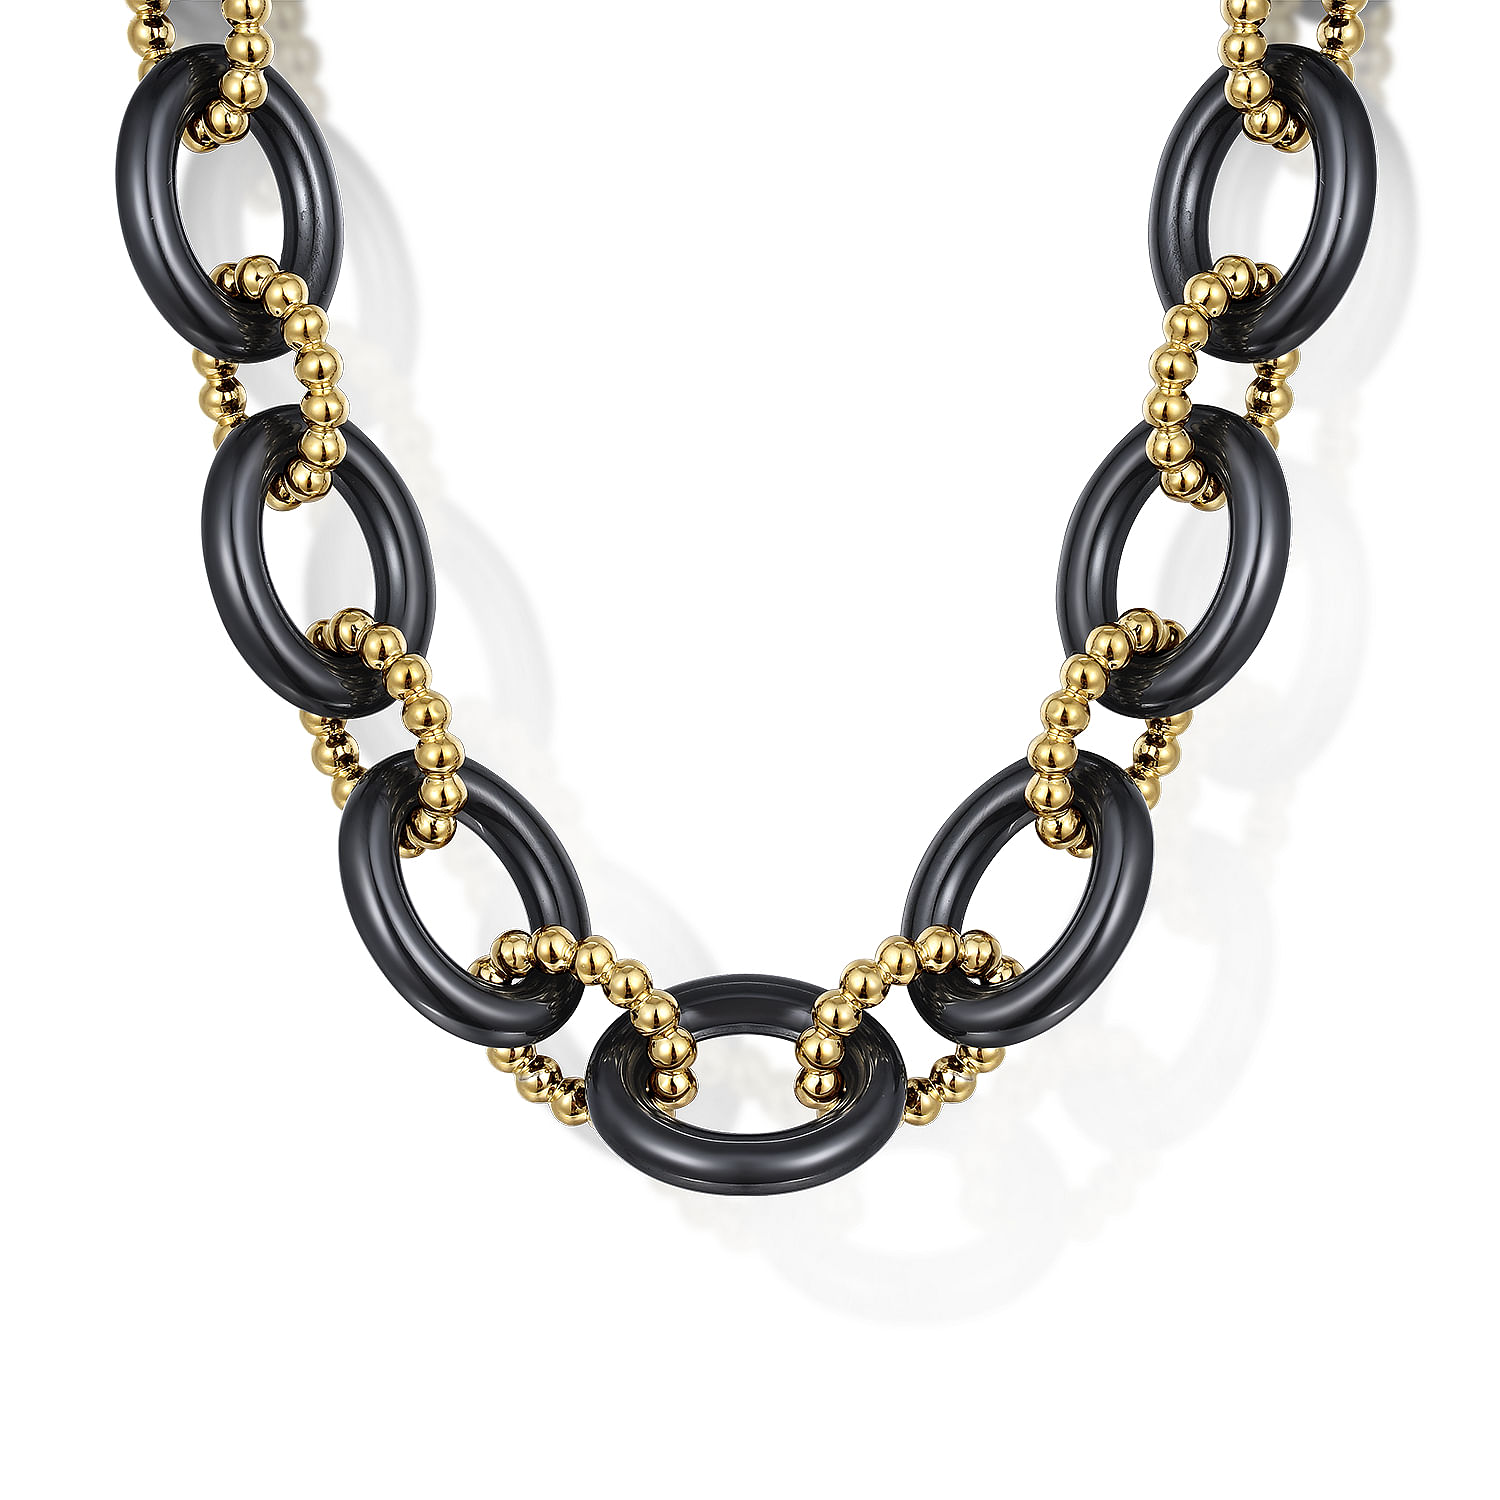 Gabriel - 14K Yellow Gold Black Ceramic Oval Link Chain Necklace with Bujukan Connectors